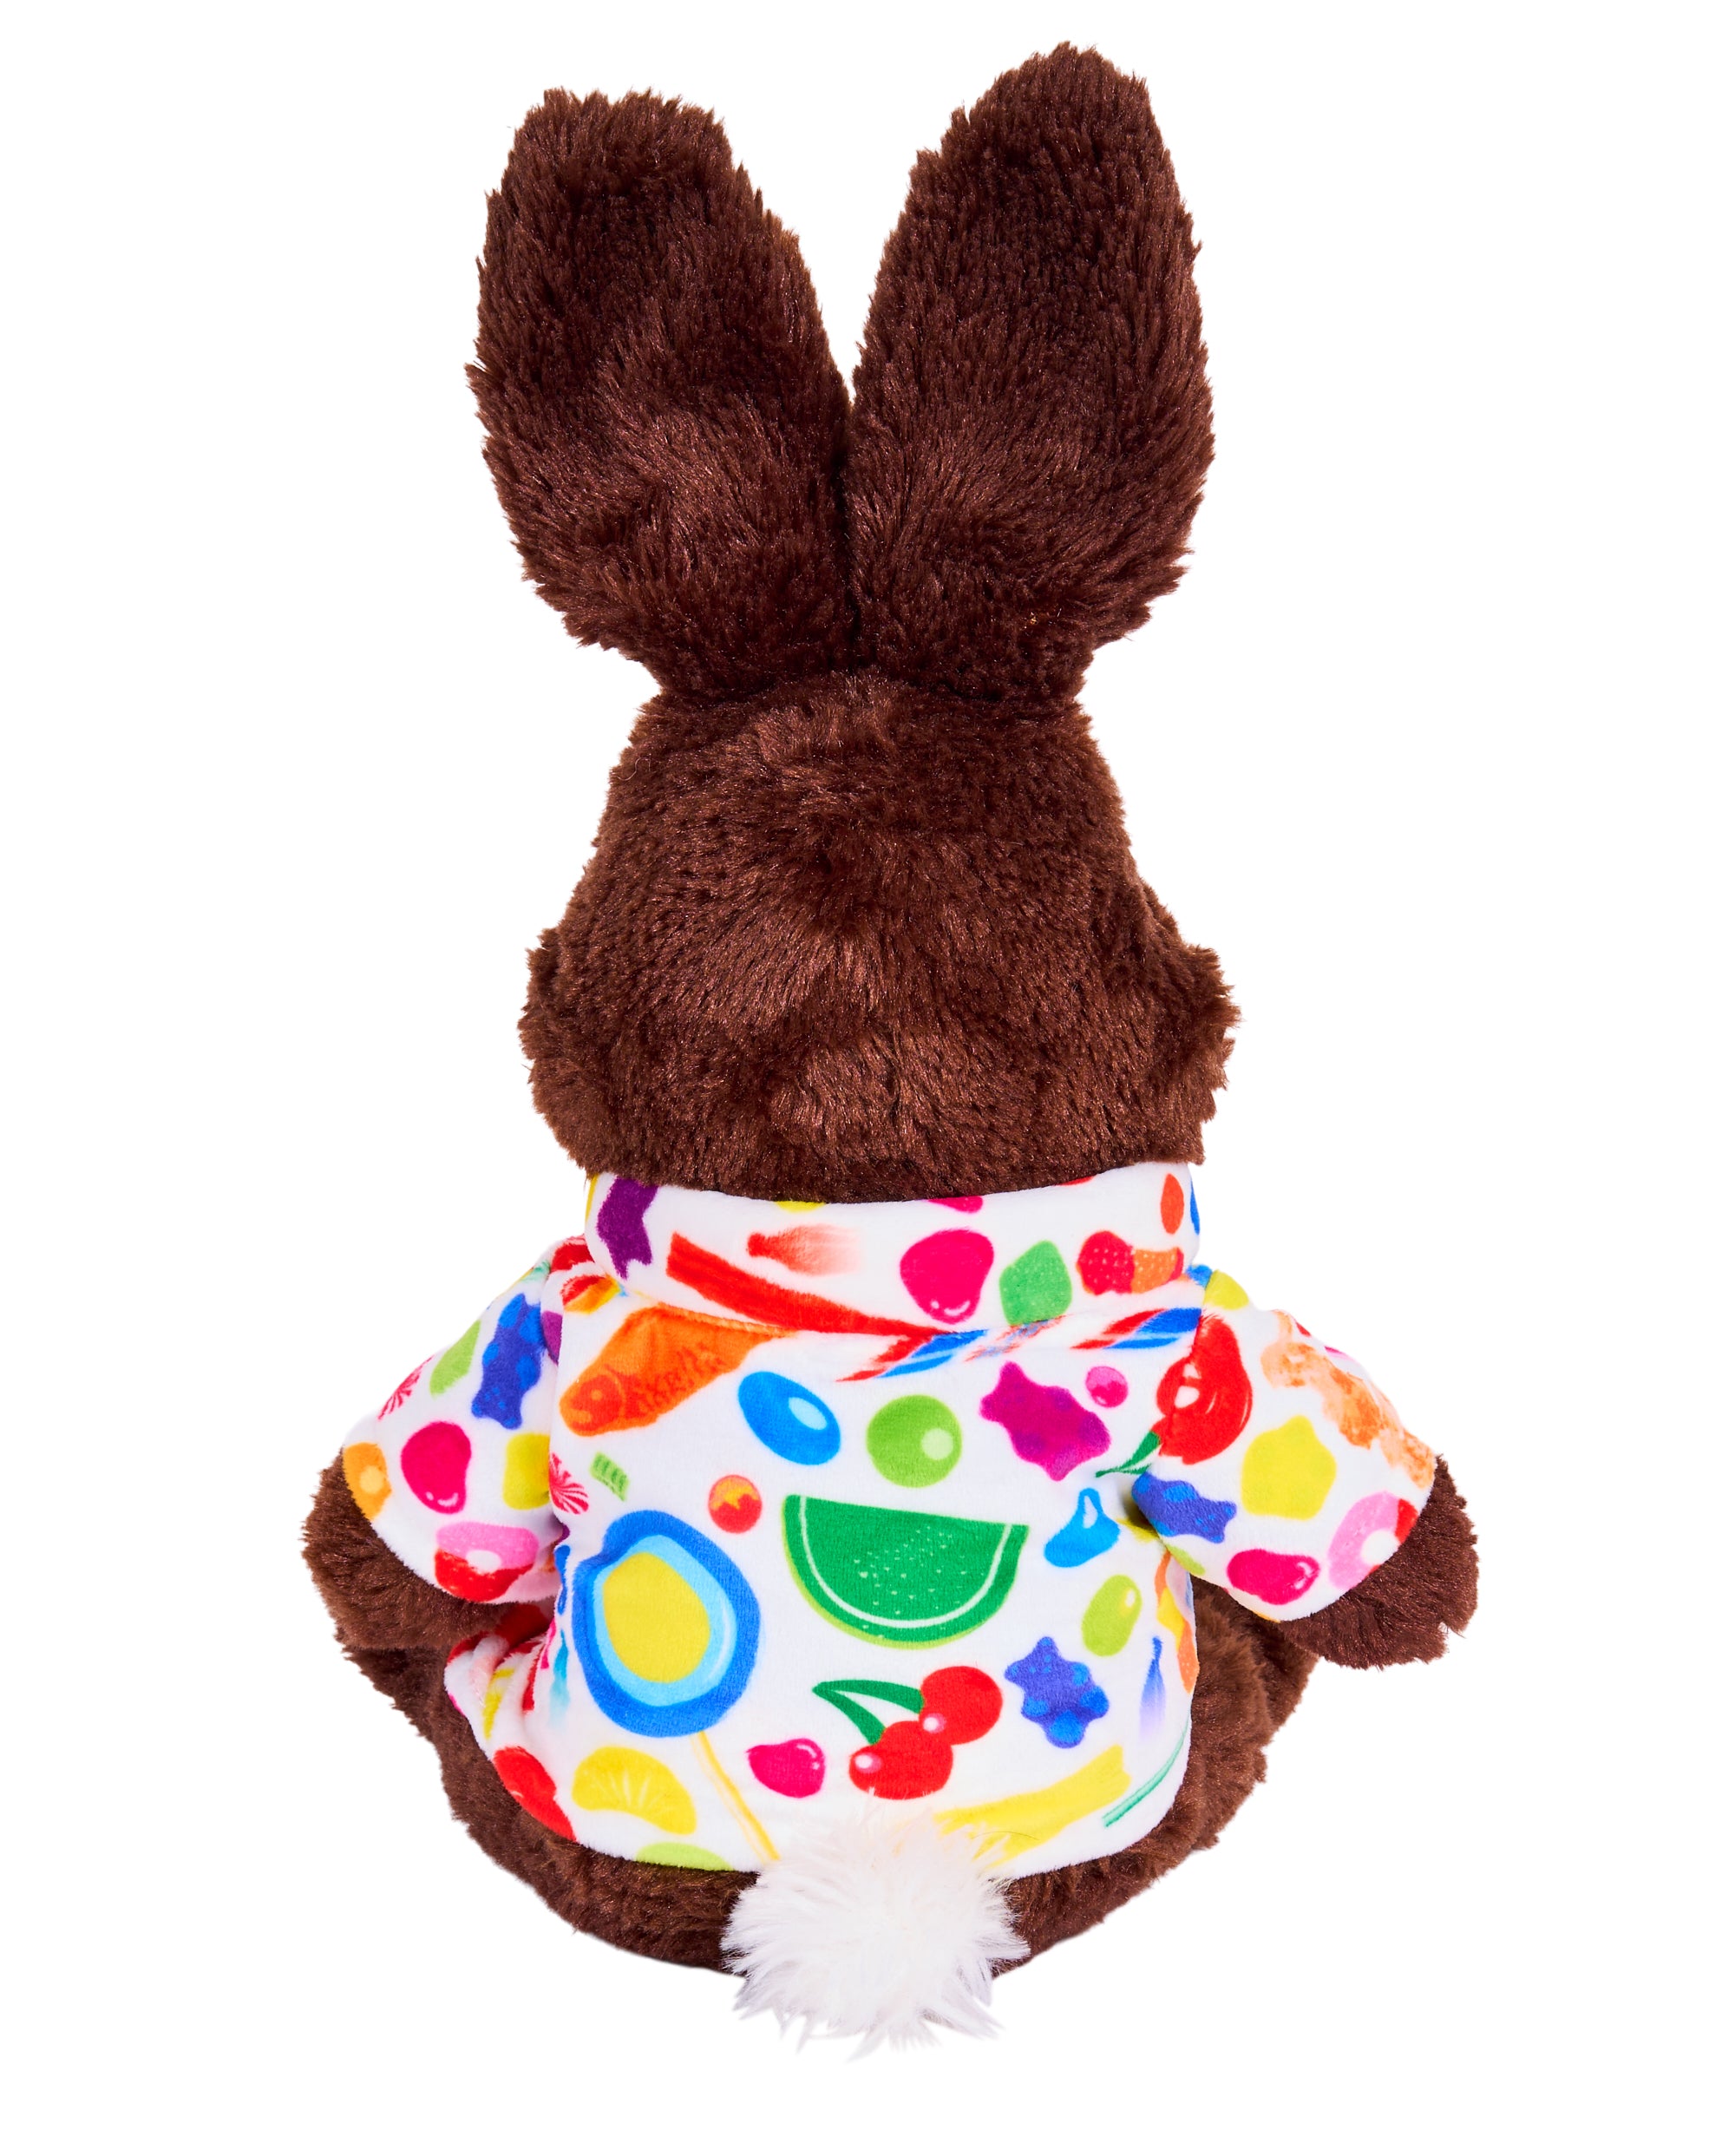 Living the Sweet Life: Chocolate the Bunny - Dylan's Candy Bar